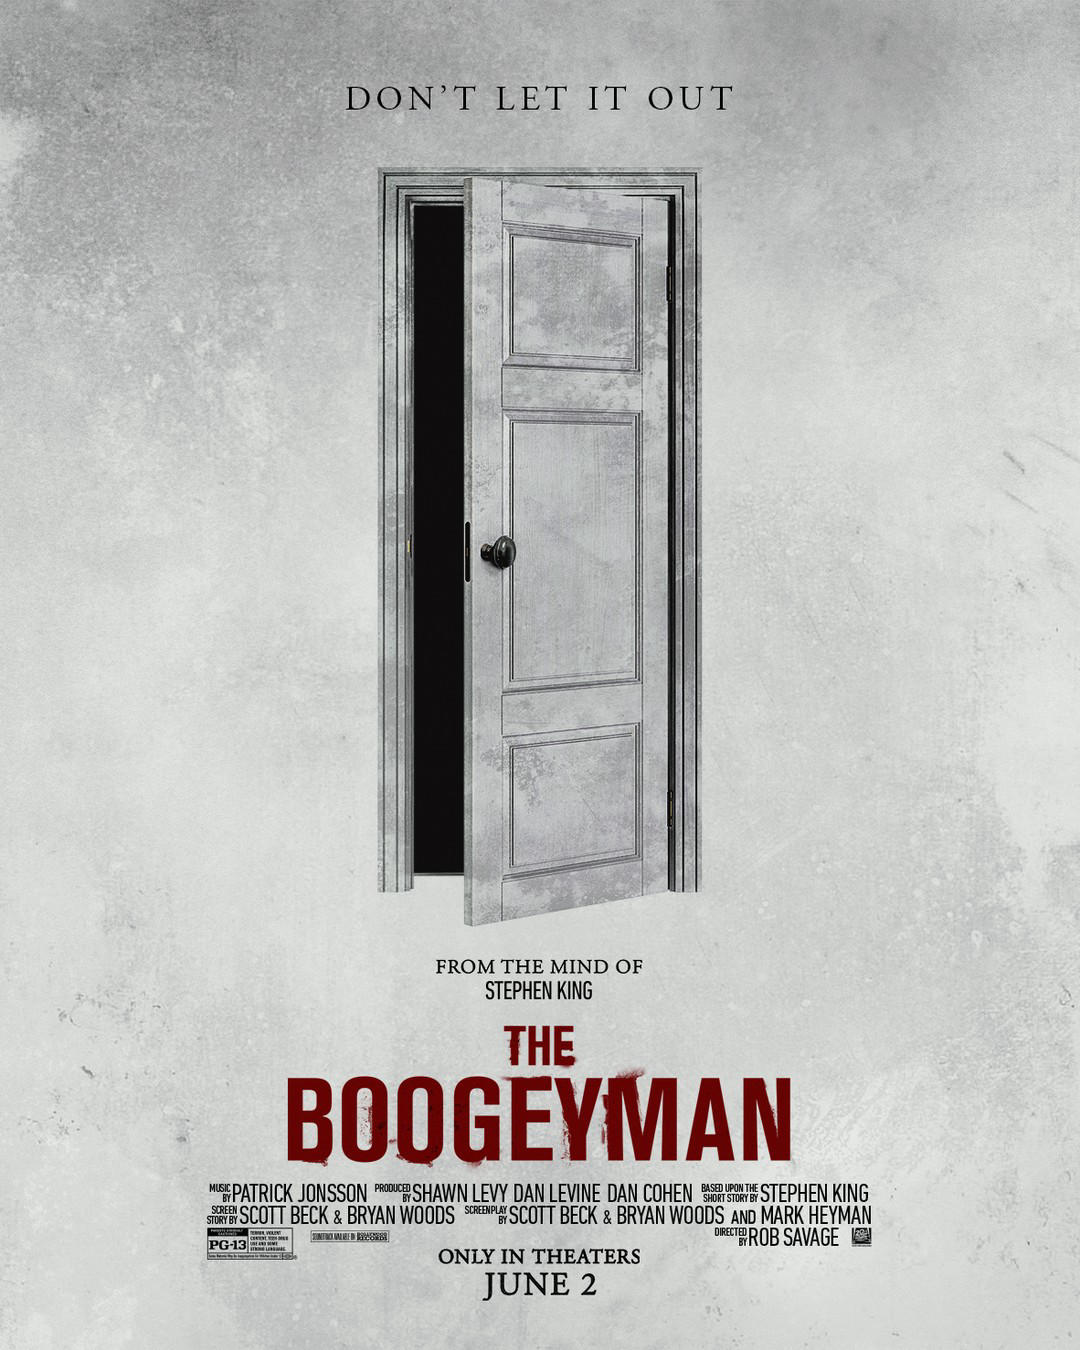 image  1 Check out the new poster for #TheBoogeyman, in theaters June 2